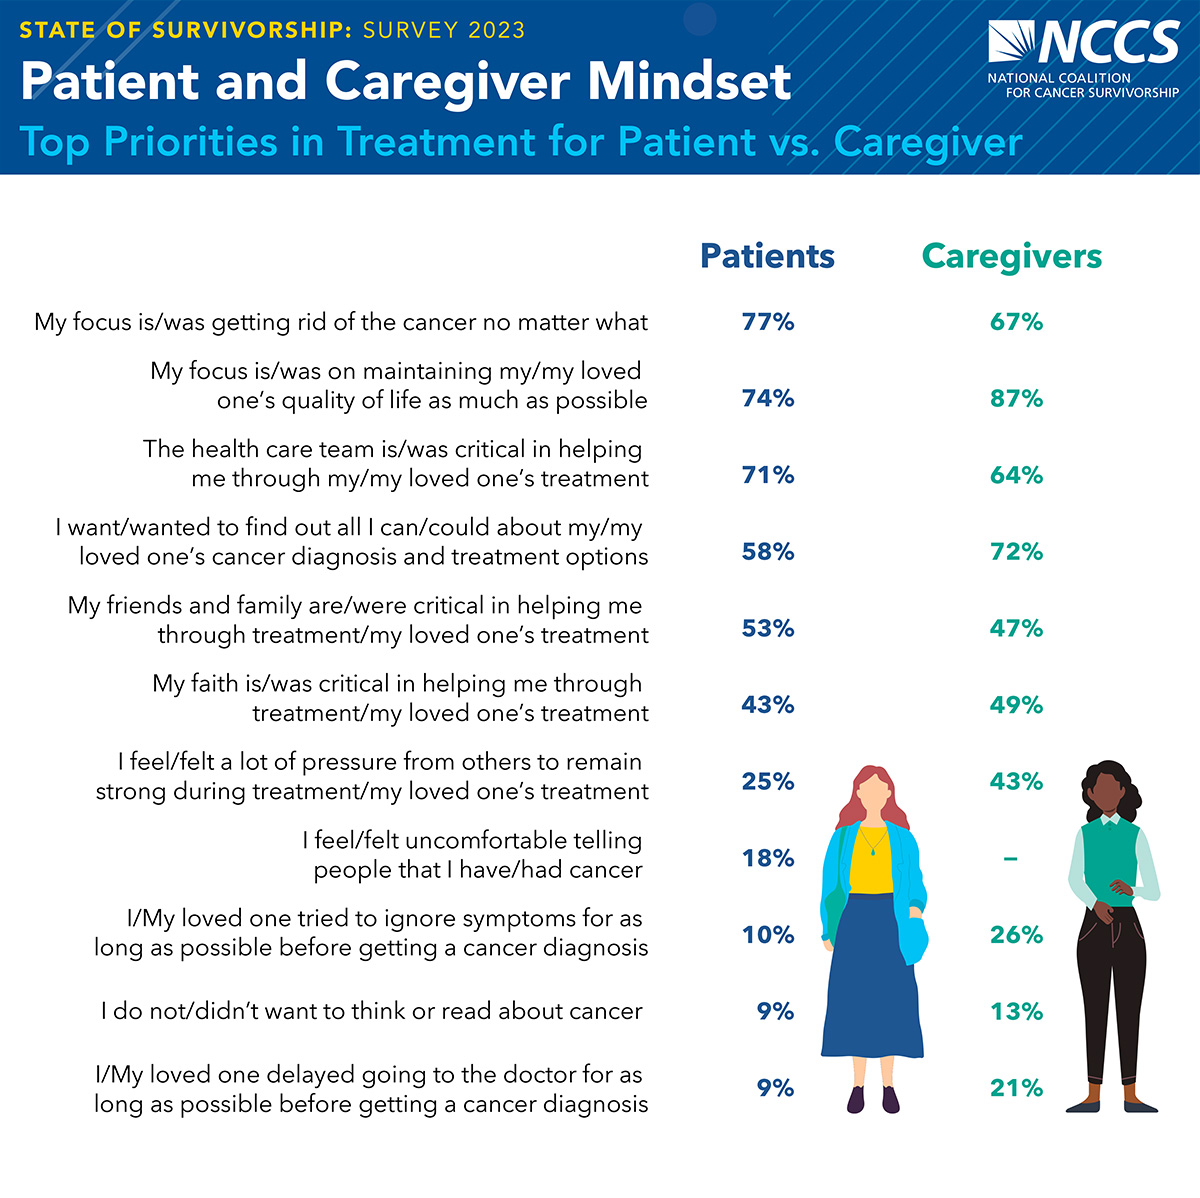 Chart - Patient and Caregiver Mindset: Top Priorities in Treatment for Patient vs. Caregiver